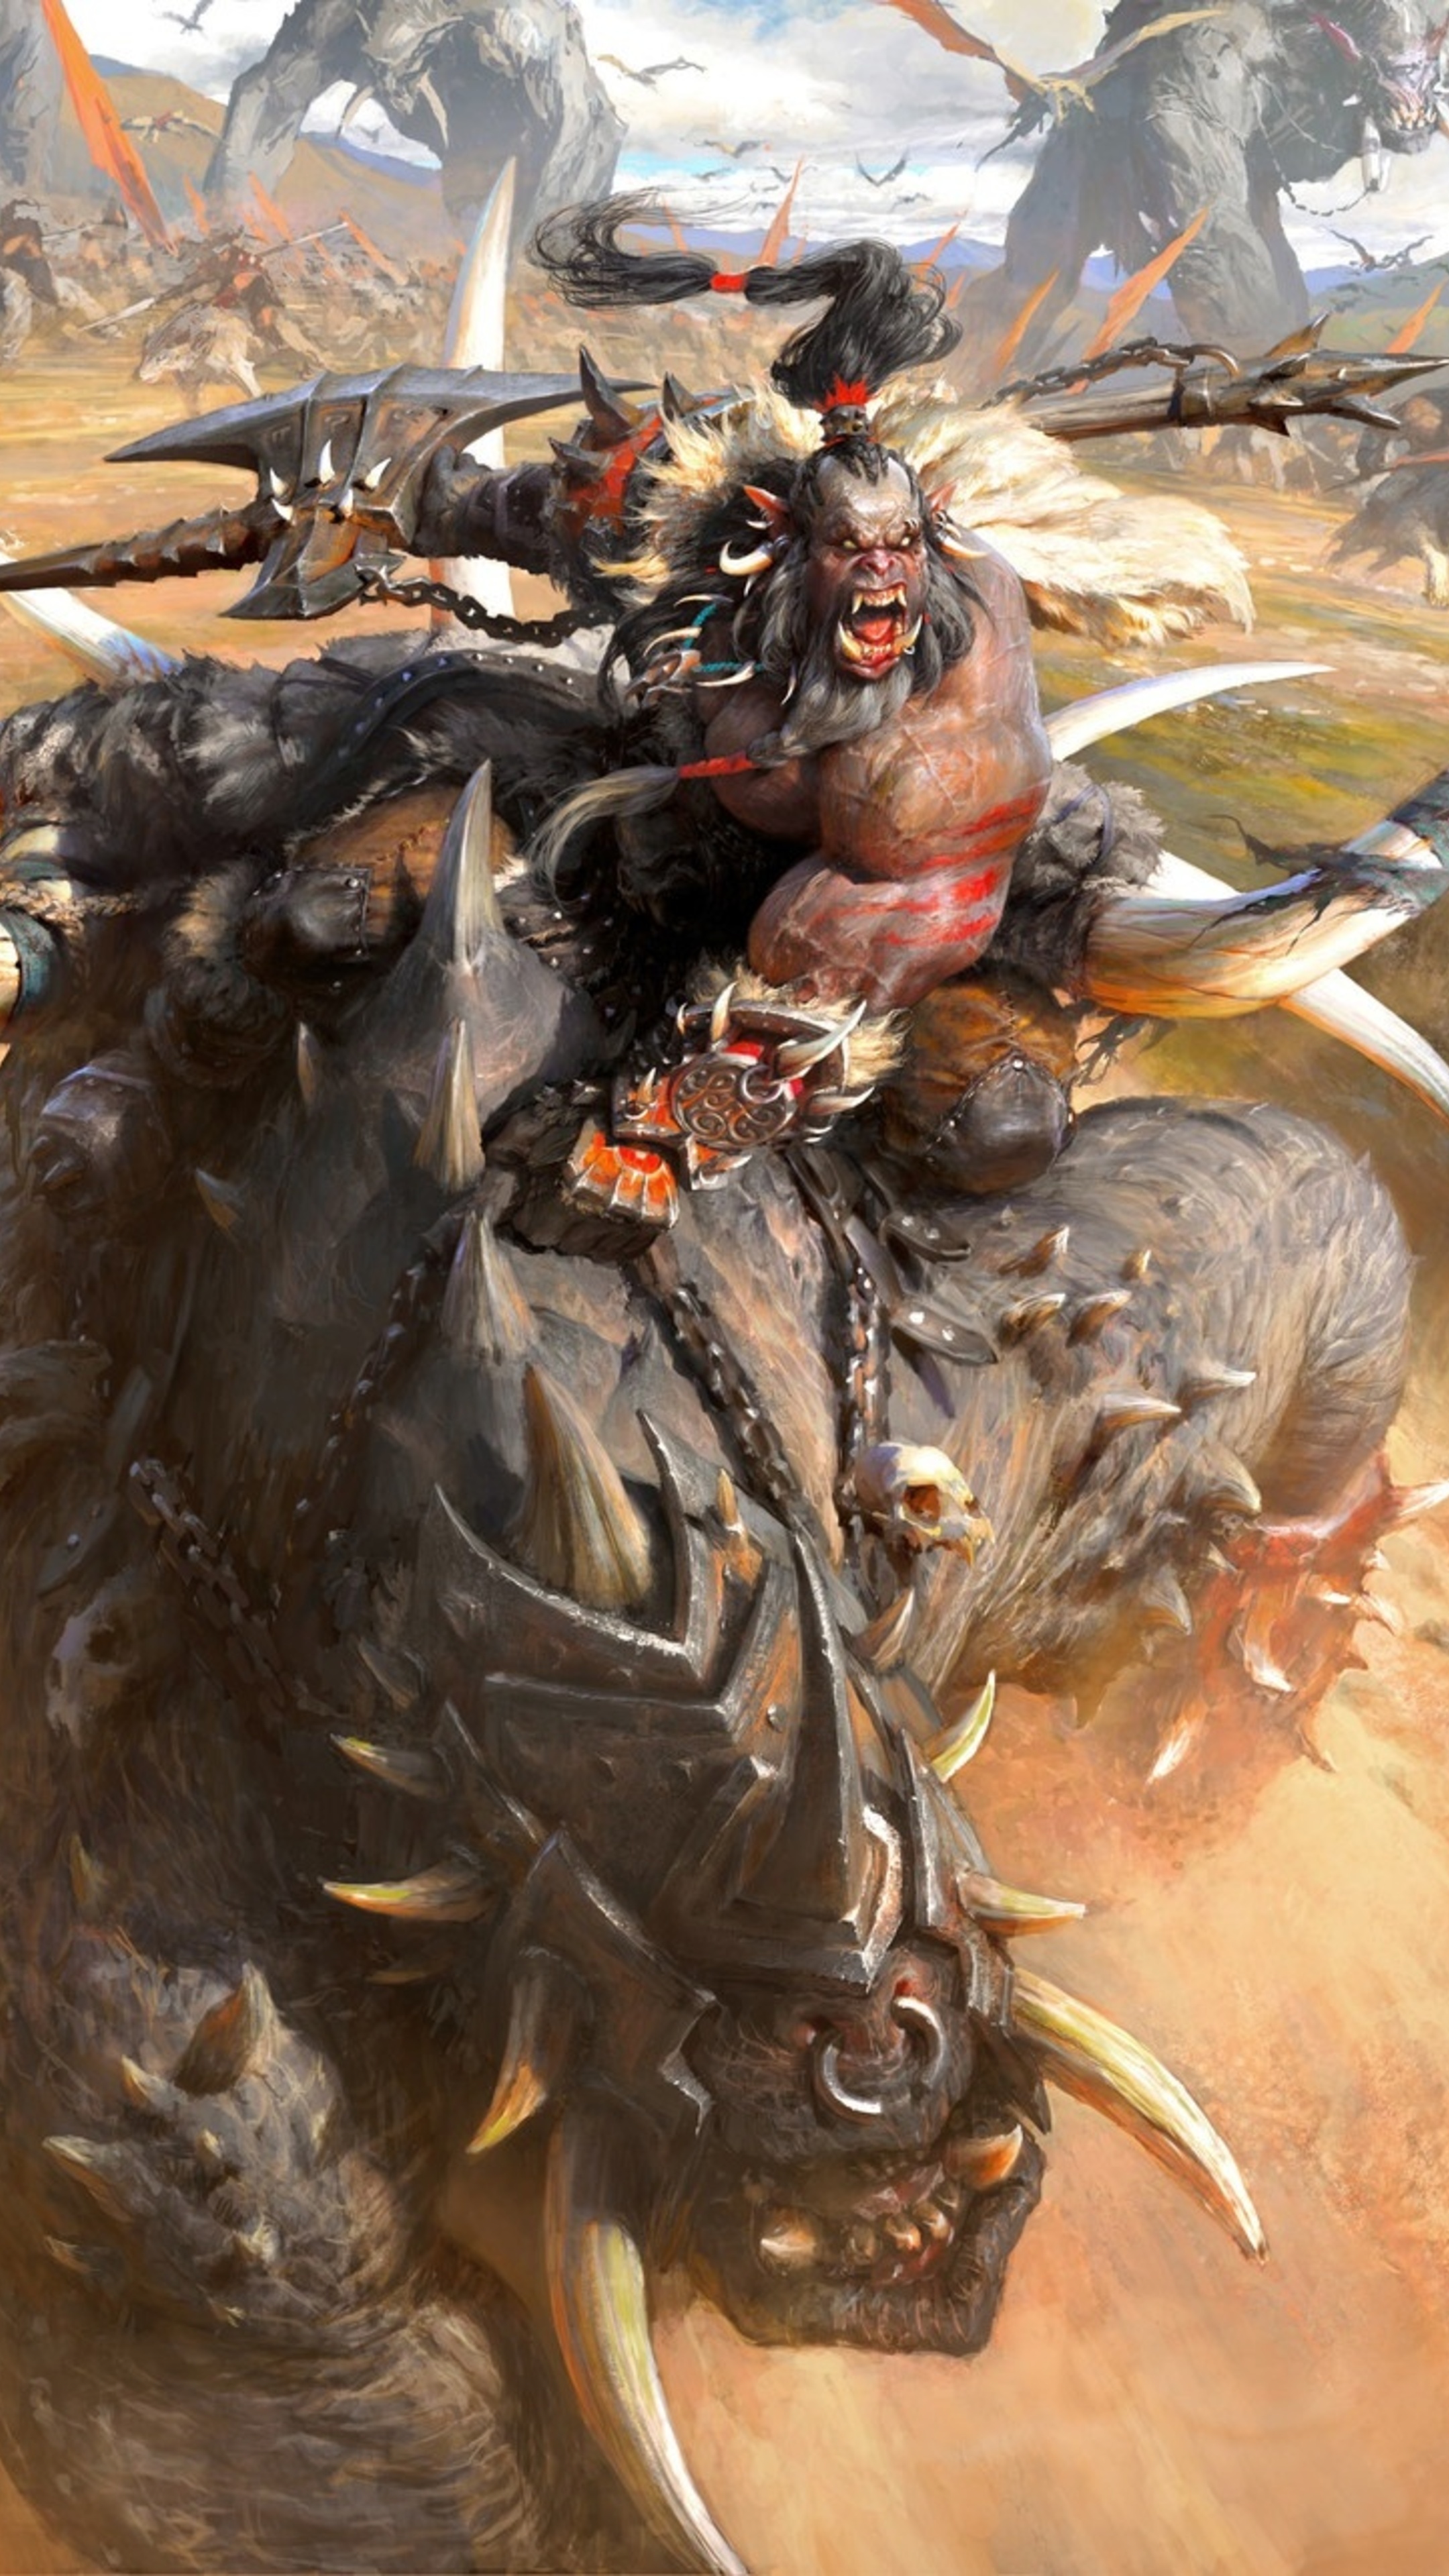 Orc in war, Sony Xperia wallpapers, Art and images, Premium HD quality, 2160x3840 4K Phone